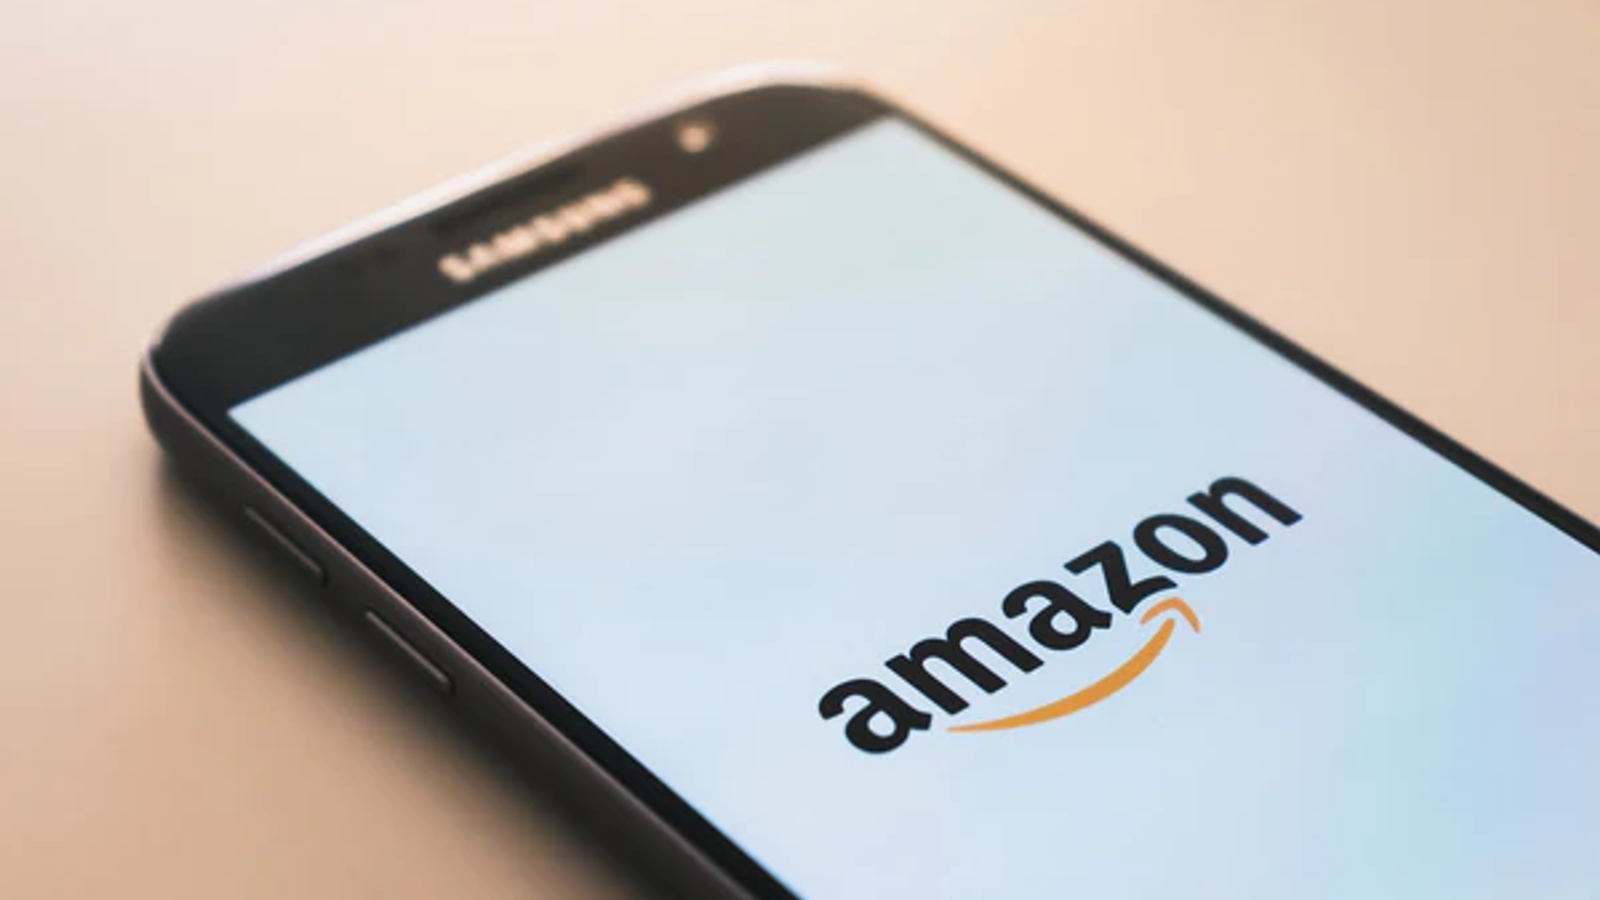 A Samsung smart phone with the Amazon logo on the screen